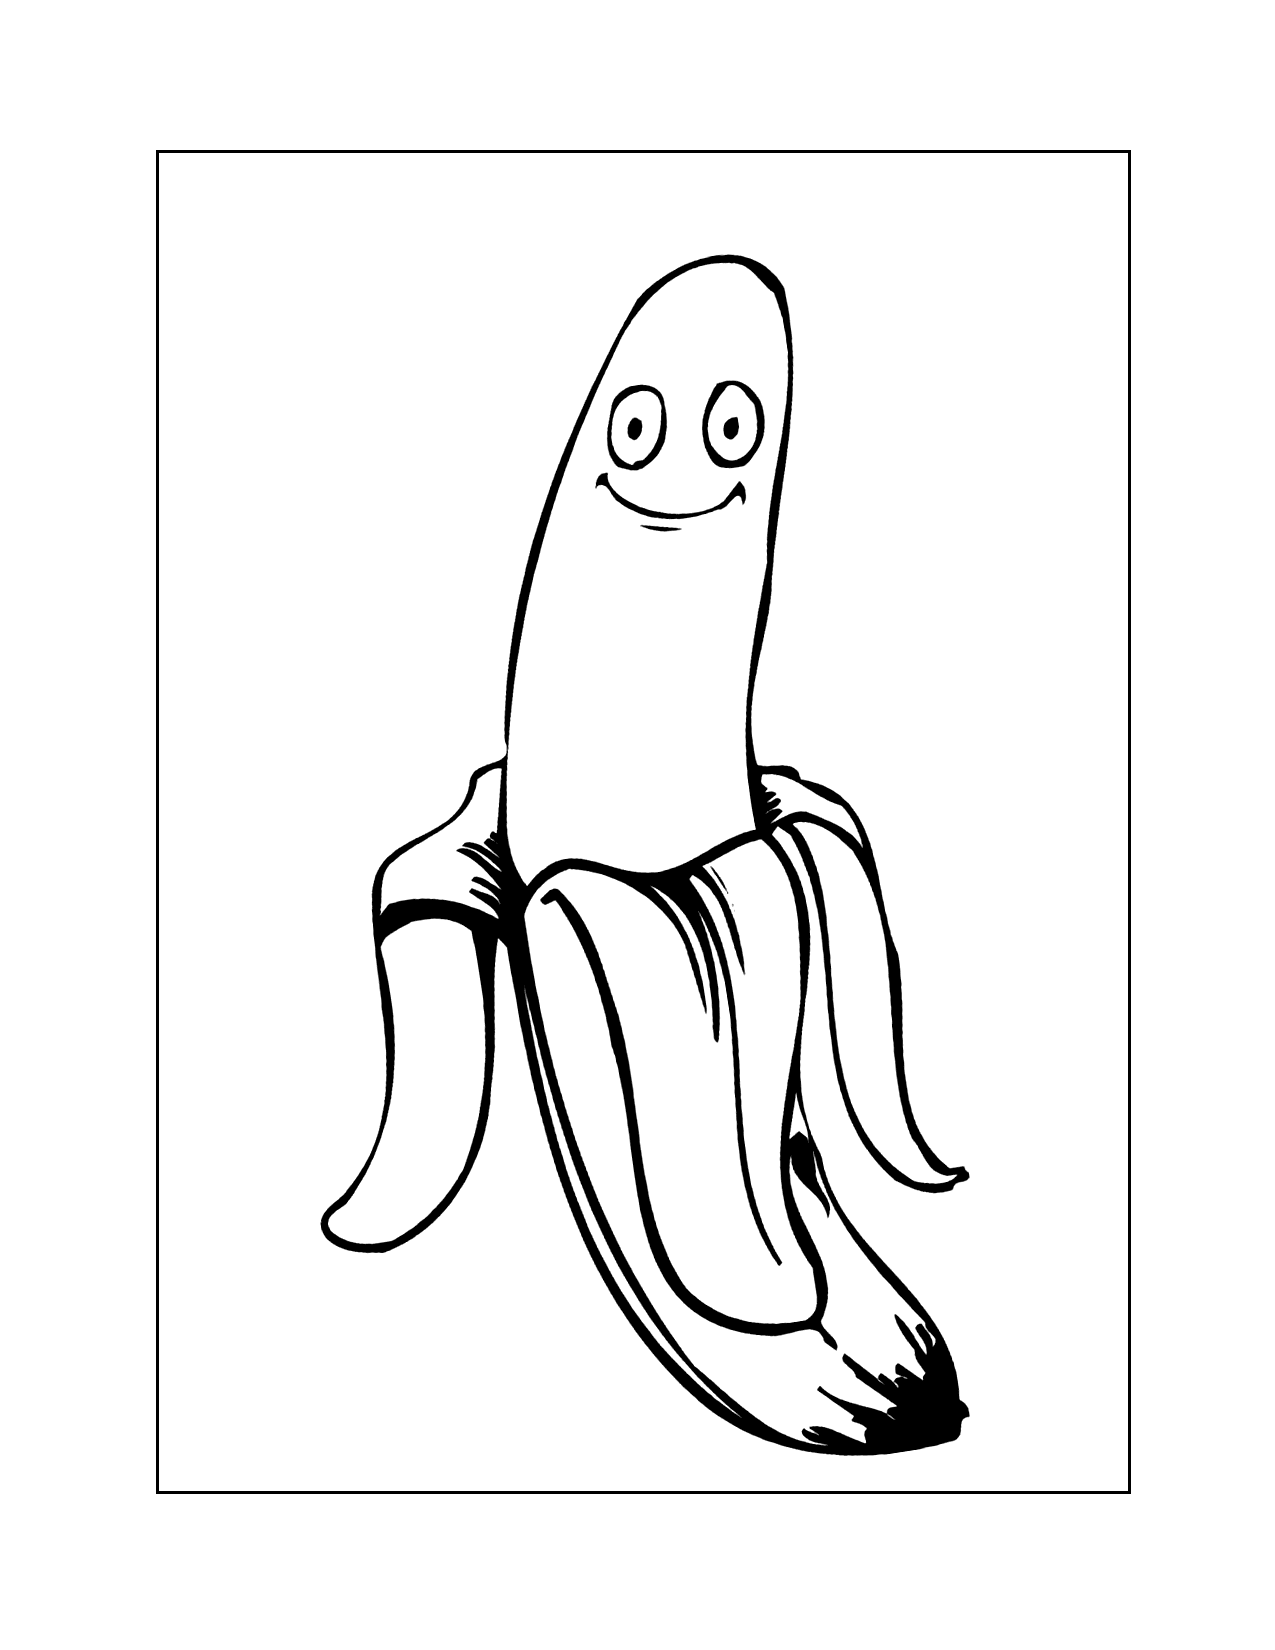 Banana With A Smiling Face Coloring Page